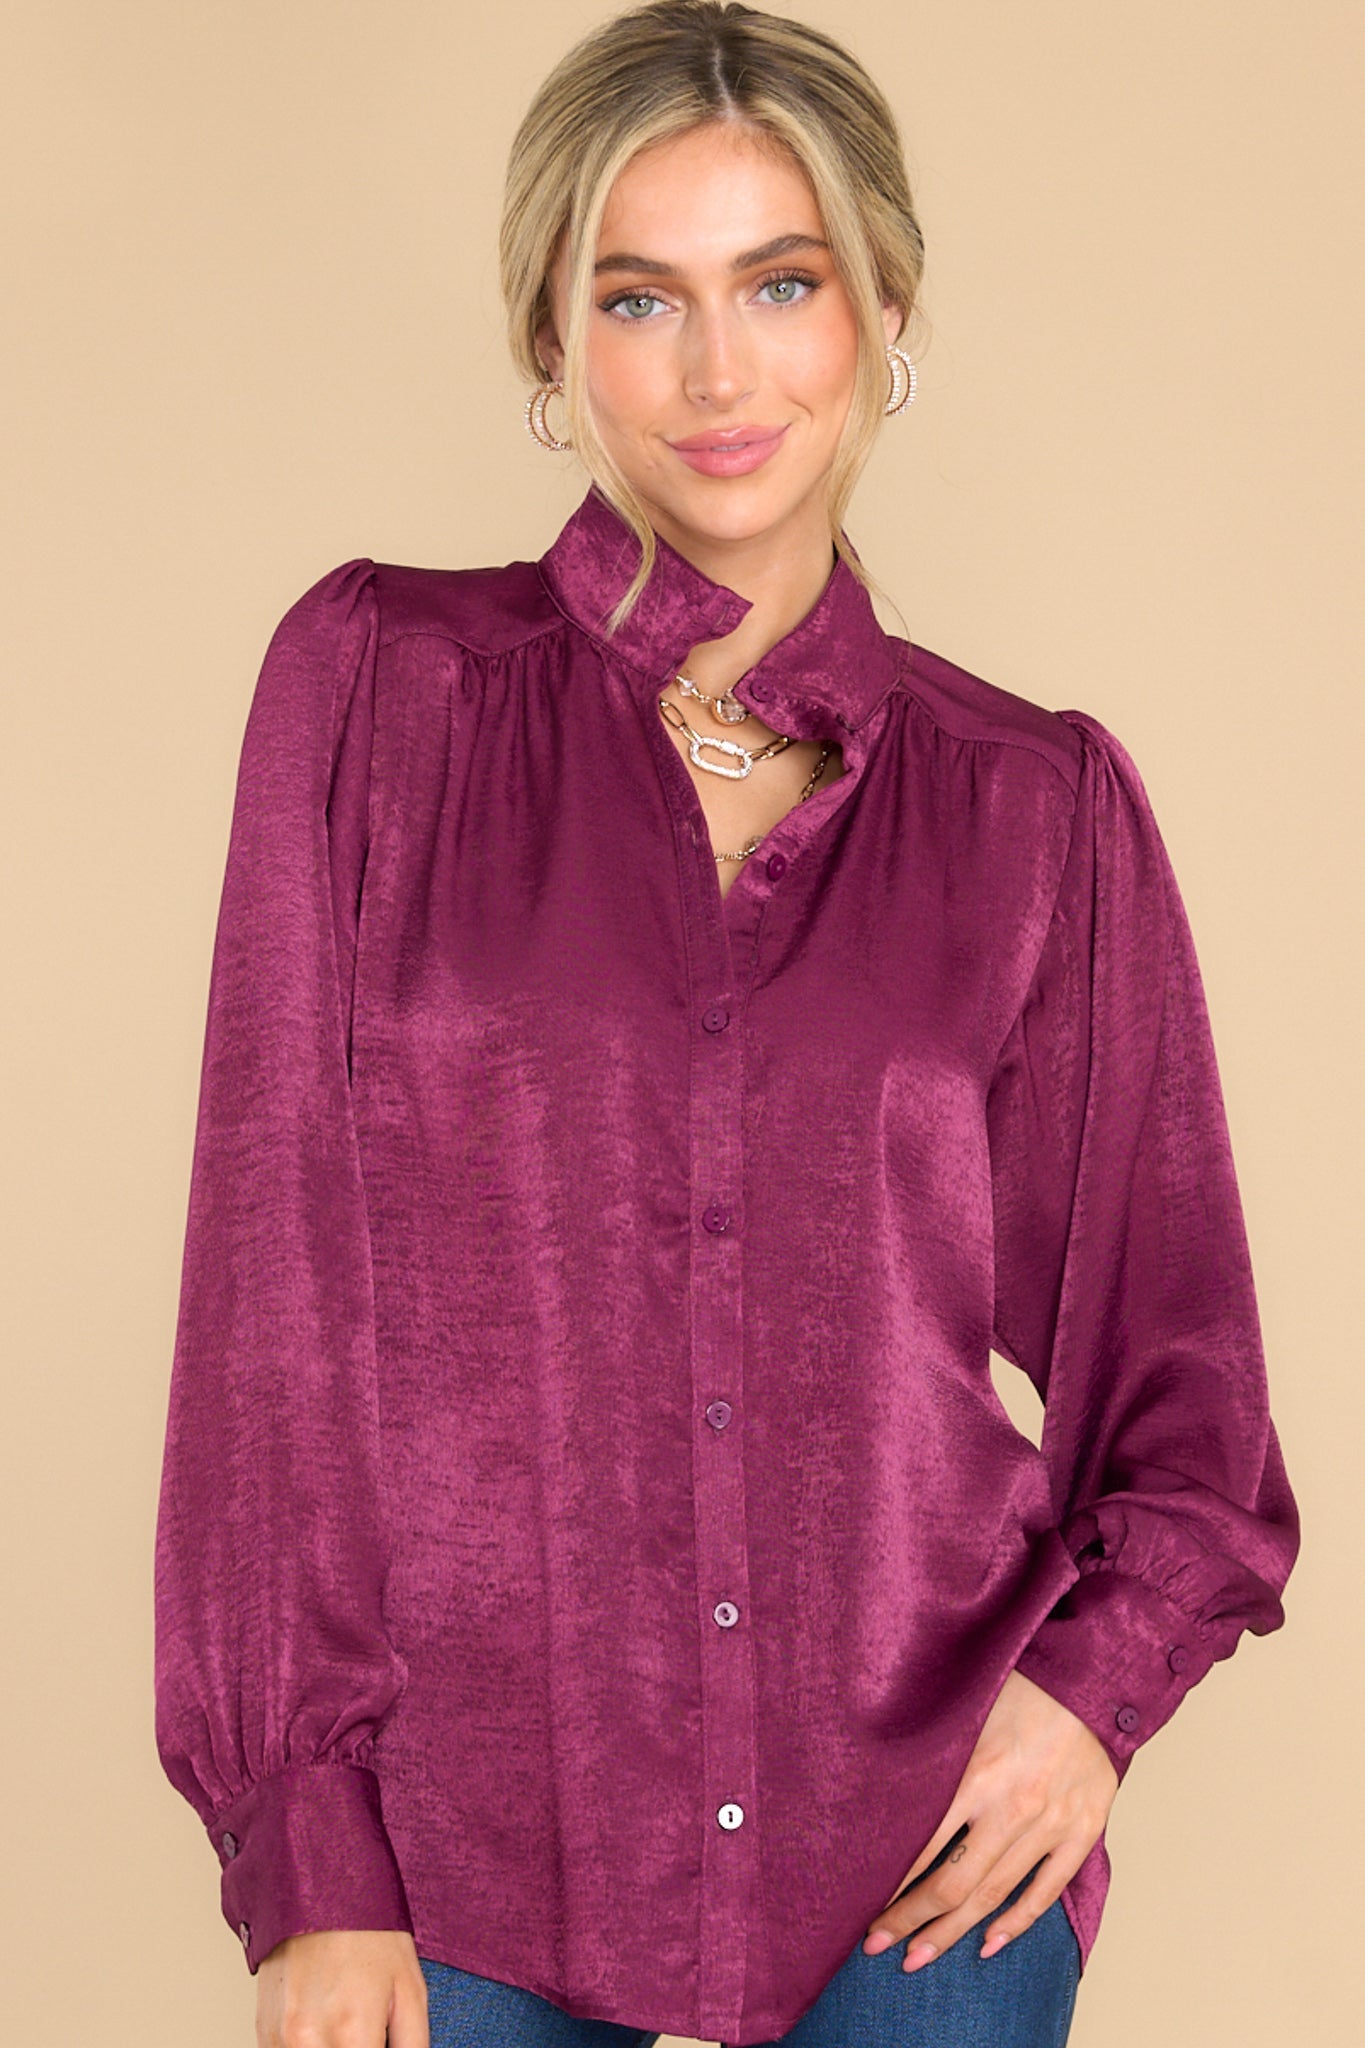 Fine Example Plum Purple Button Front Top - Red Dress